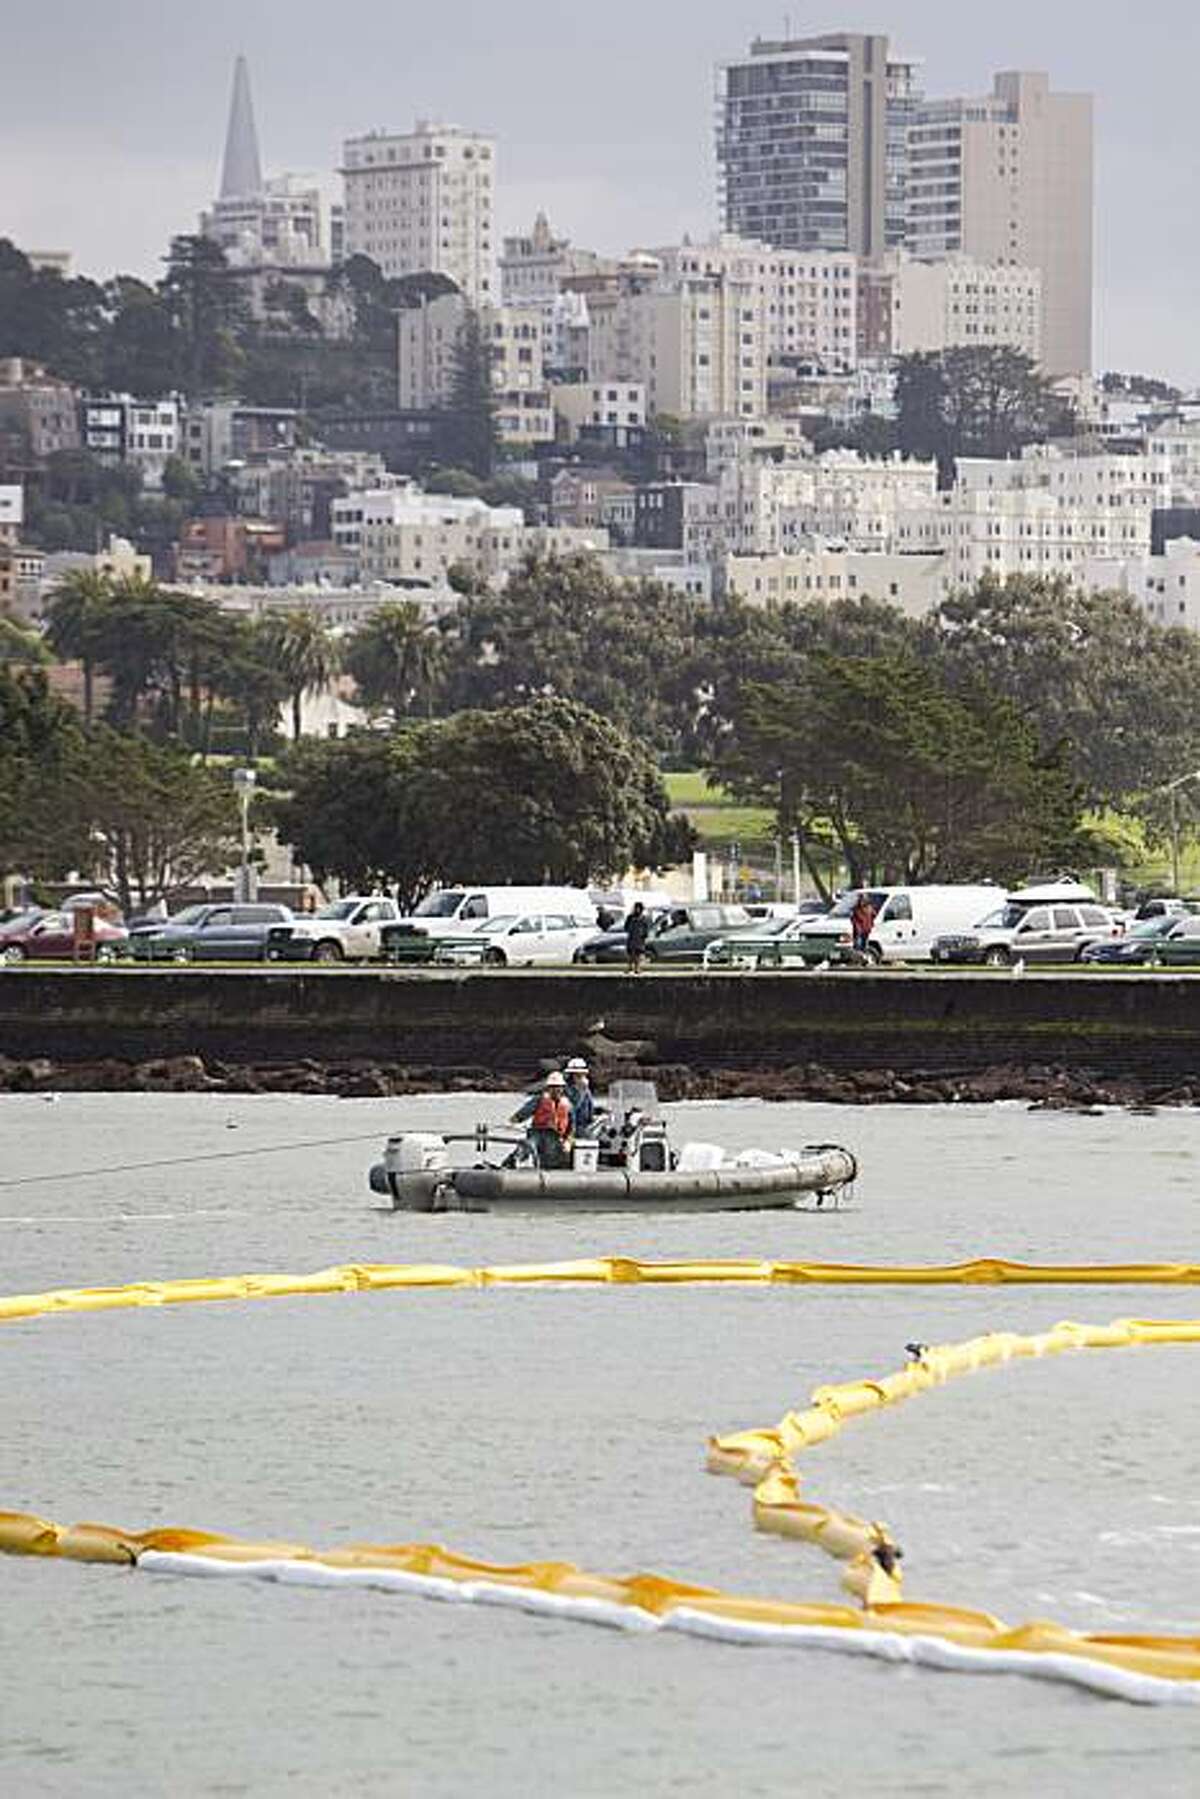 Workers put oil containment booms around a barge that ran aground in the water near the St. Francis Yacht Club in San Francisco on Tuesday. The sand transportation barge was intentionally run aground after it began taking on water and booms were put out as a precautionary measure.